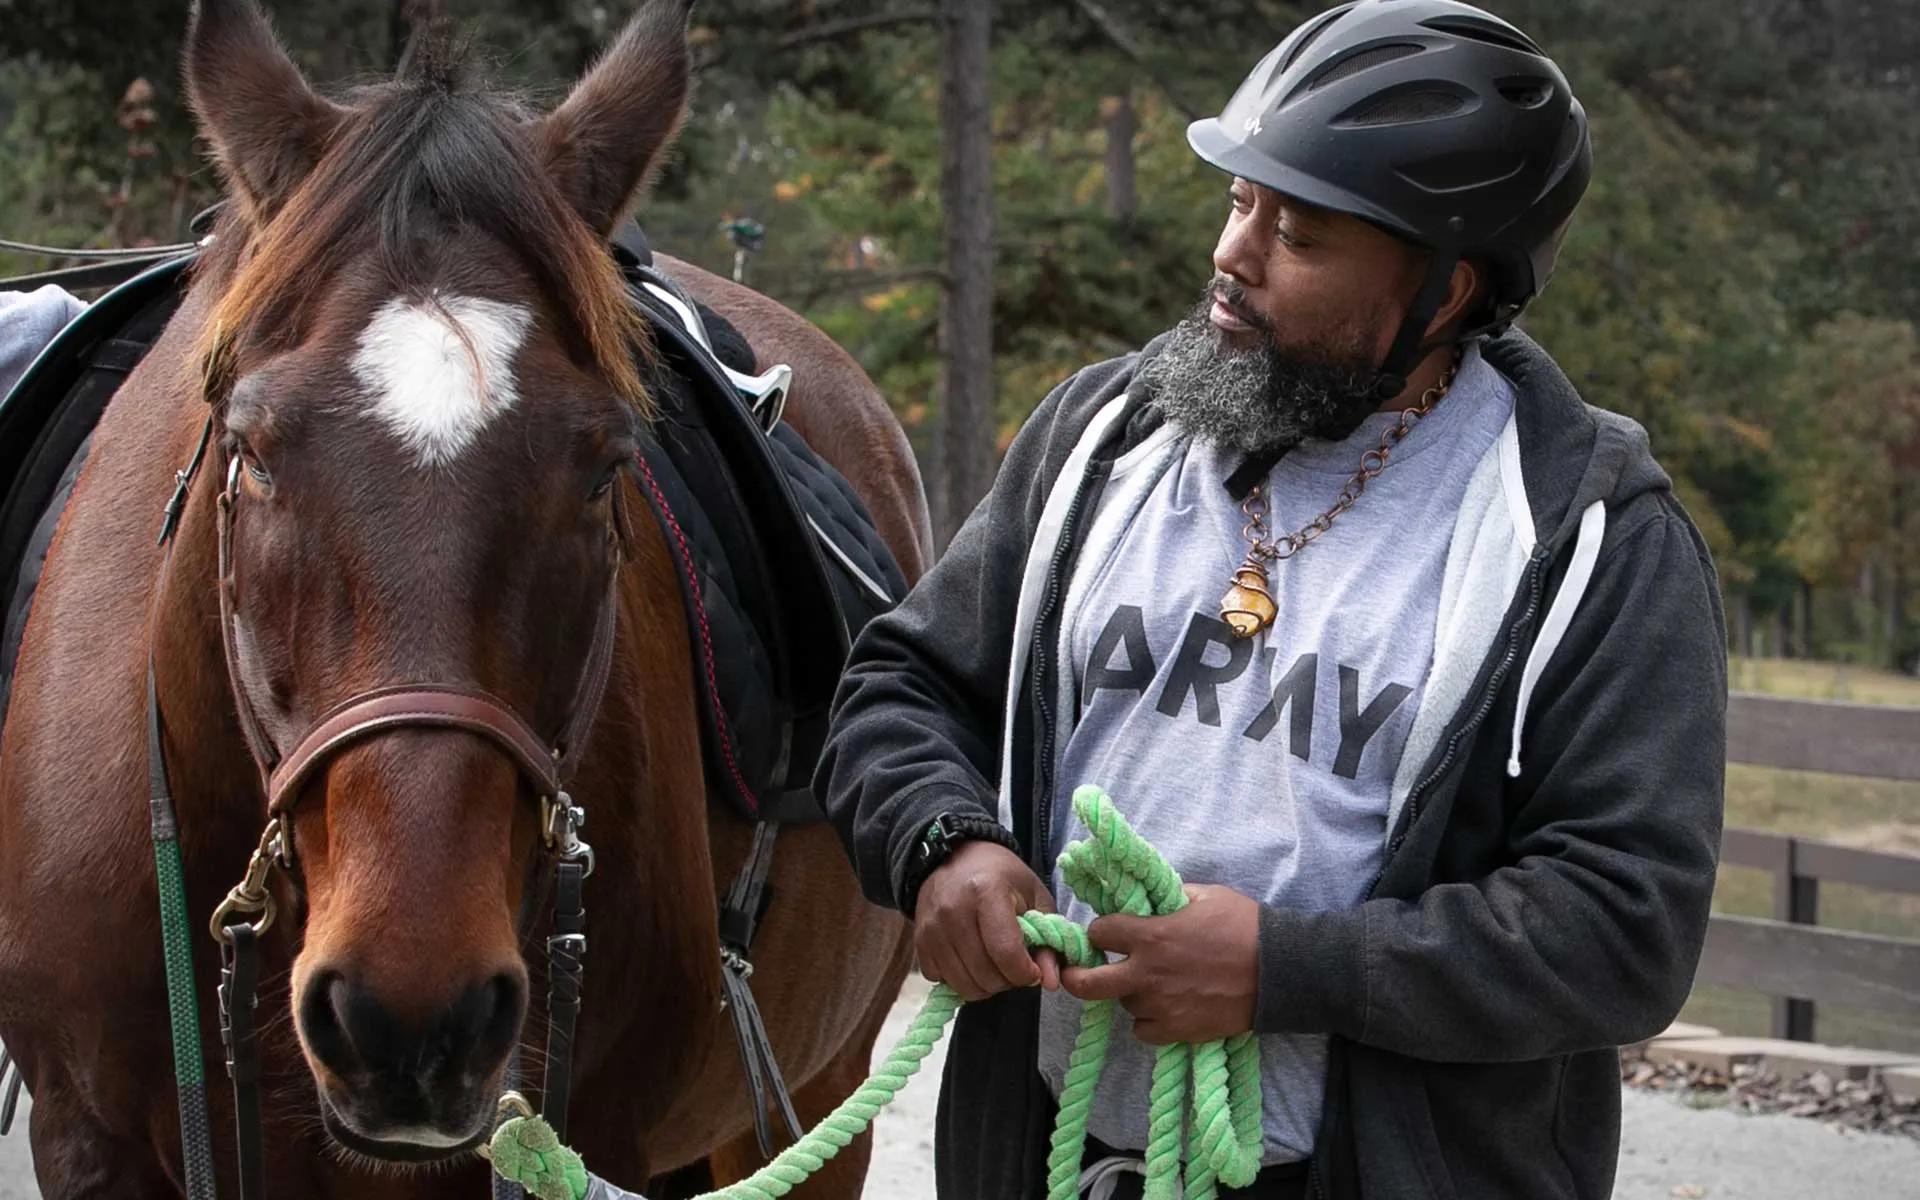 Support our troops with equine therapy sessions to help with healing.